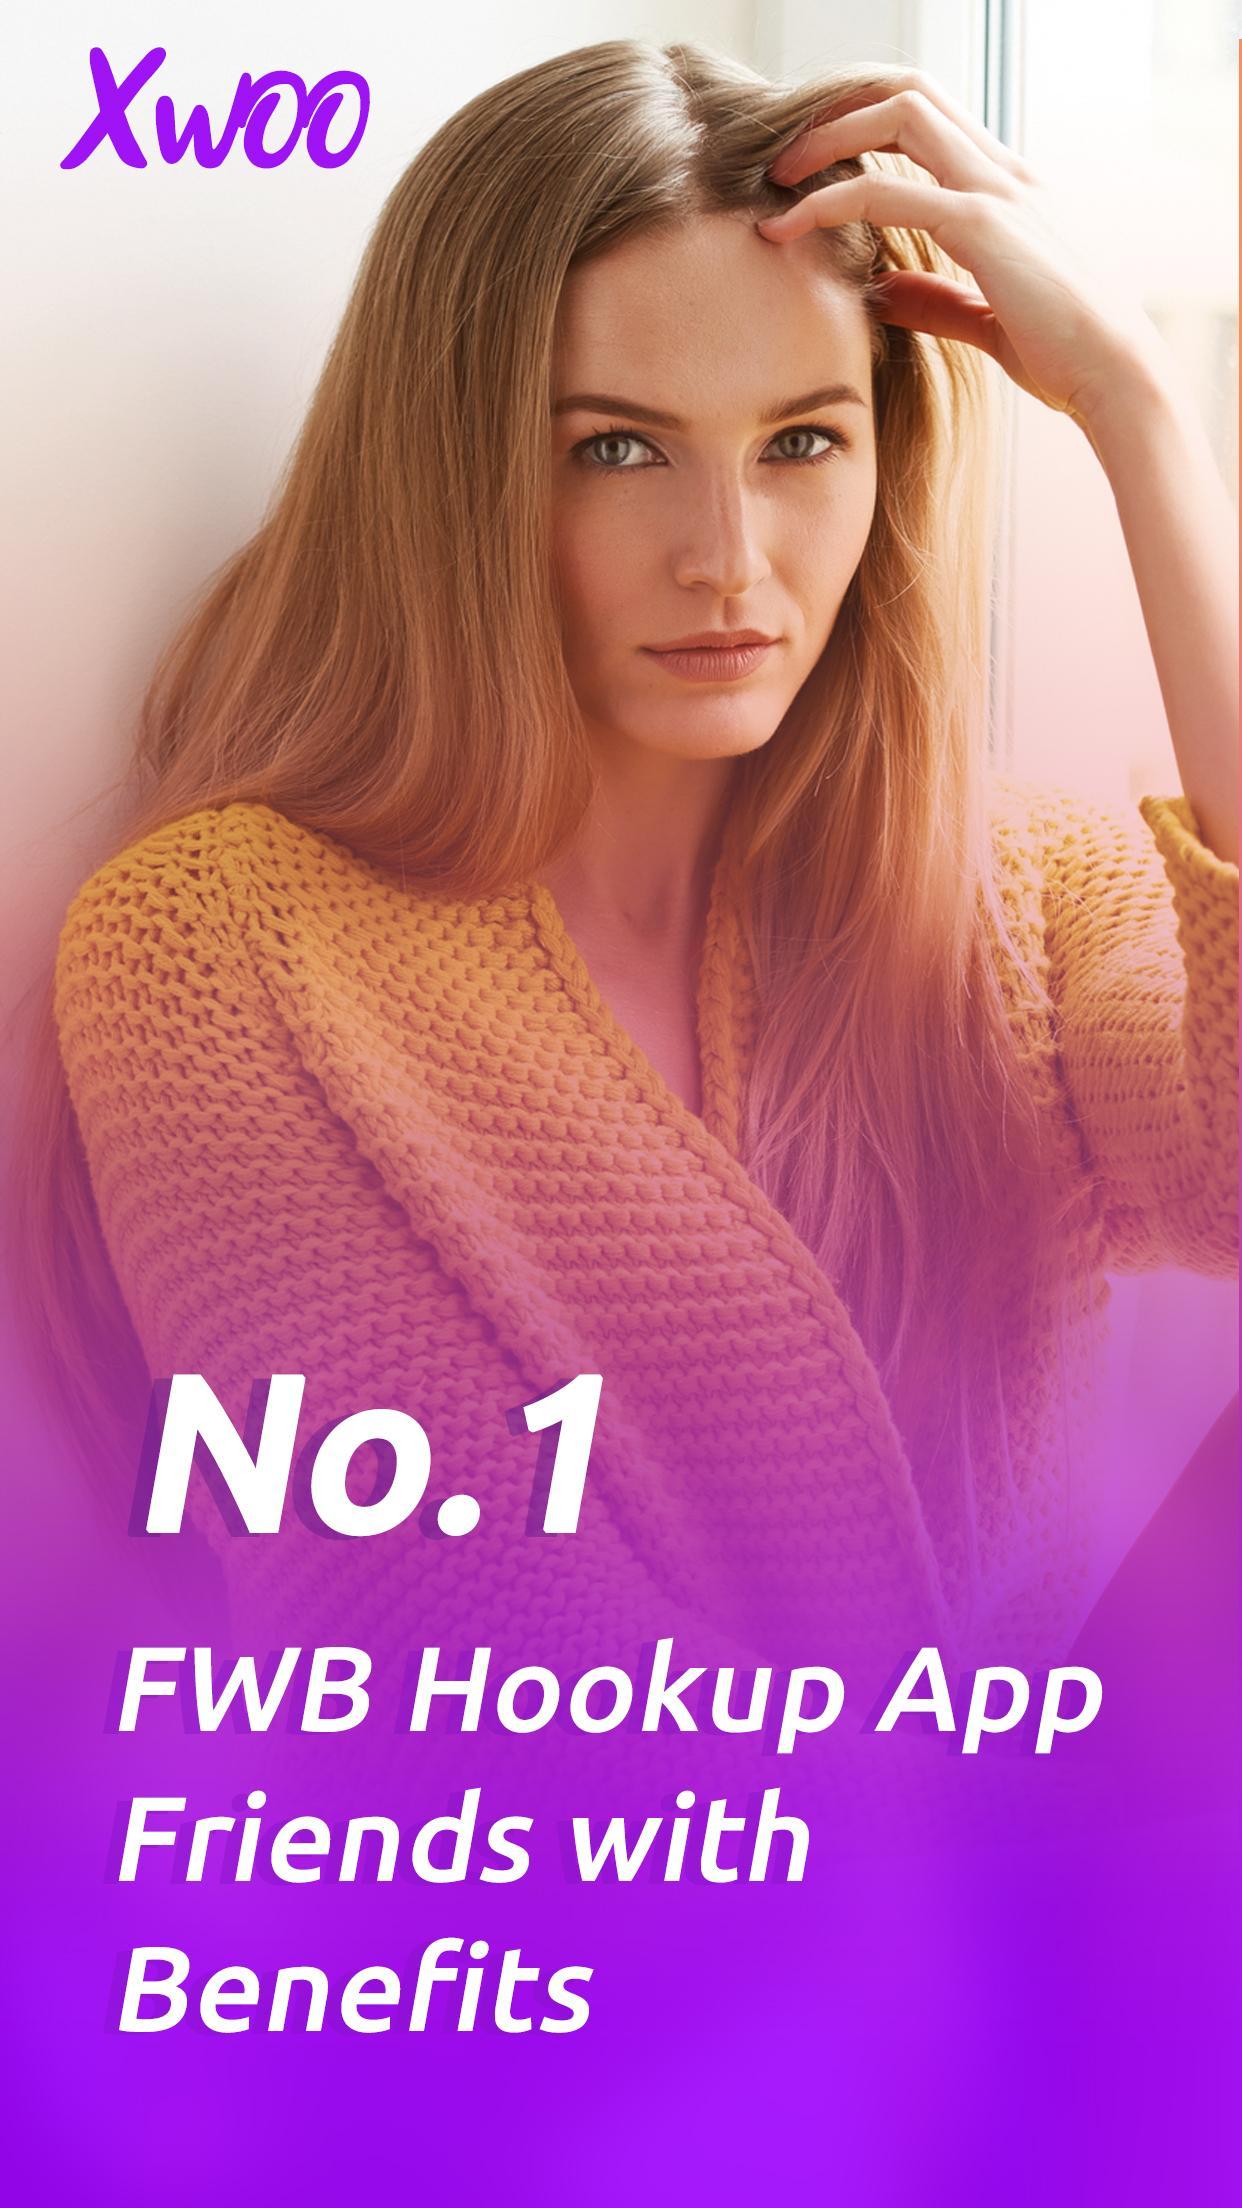 FWB App: 7 FWB Dating Apps that Really Work for Finding a Friends With Benefits